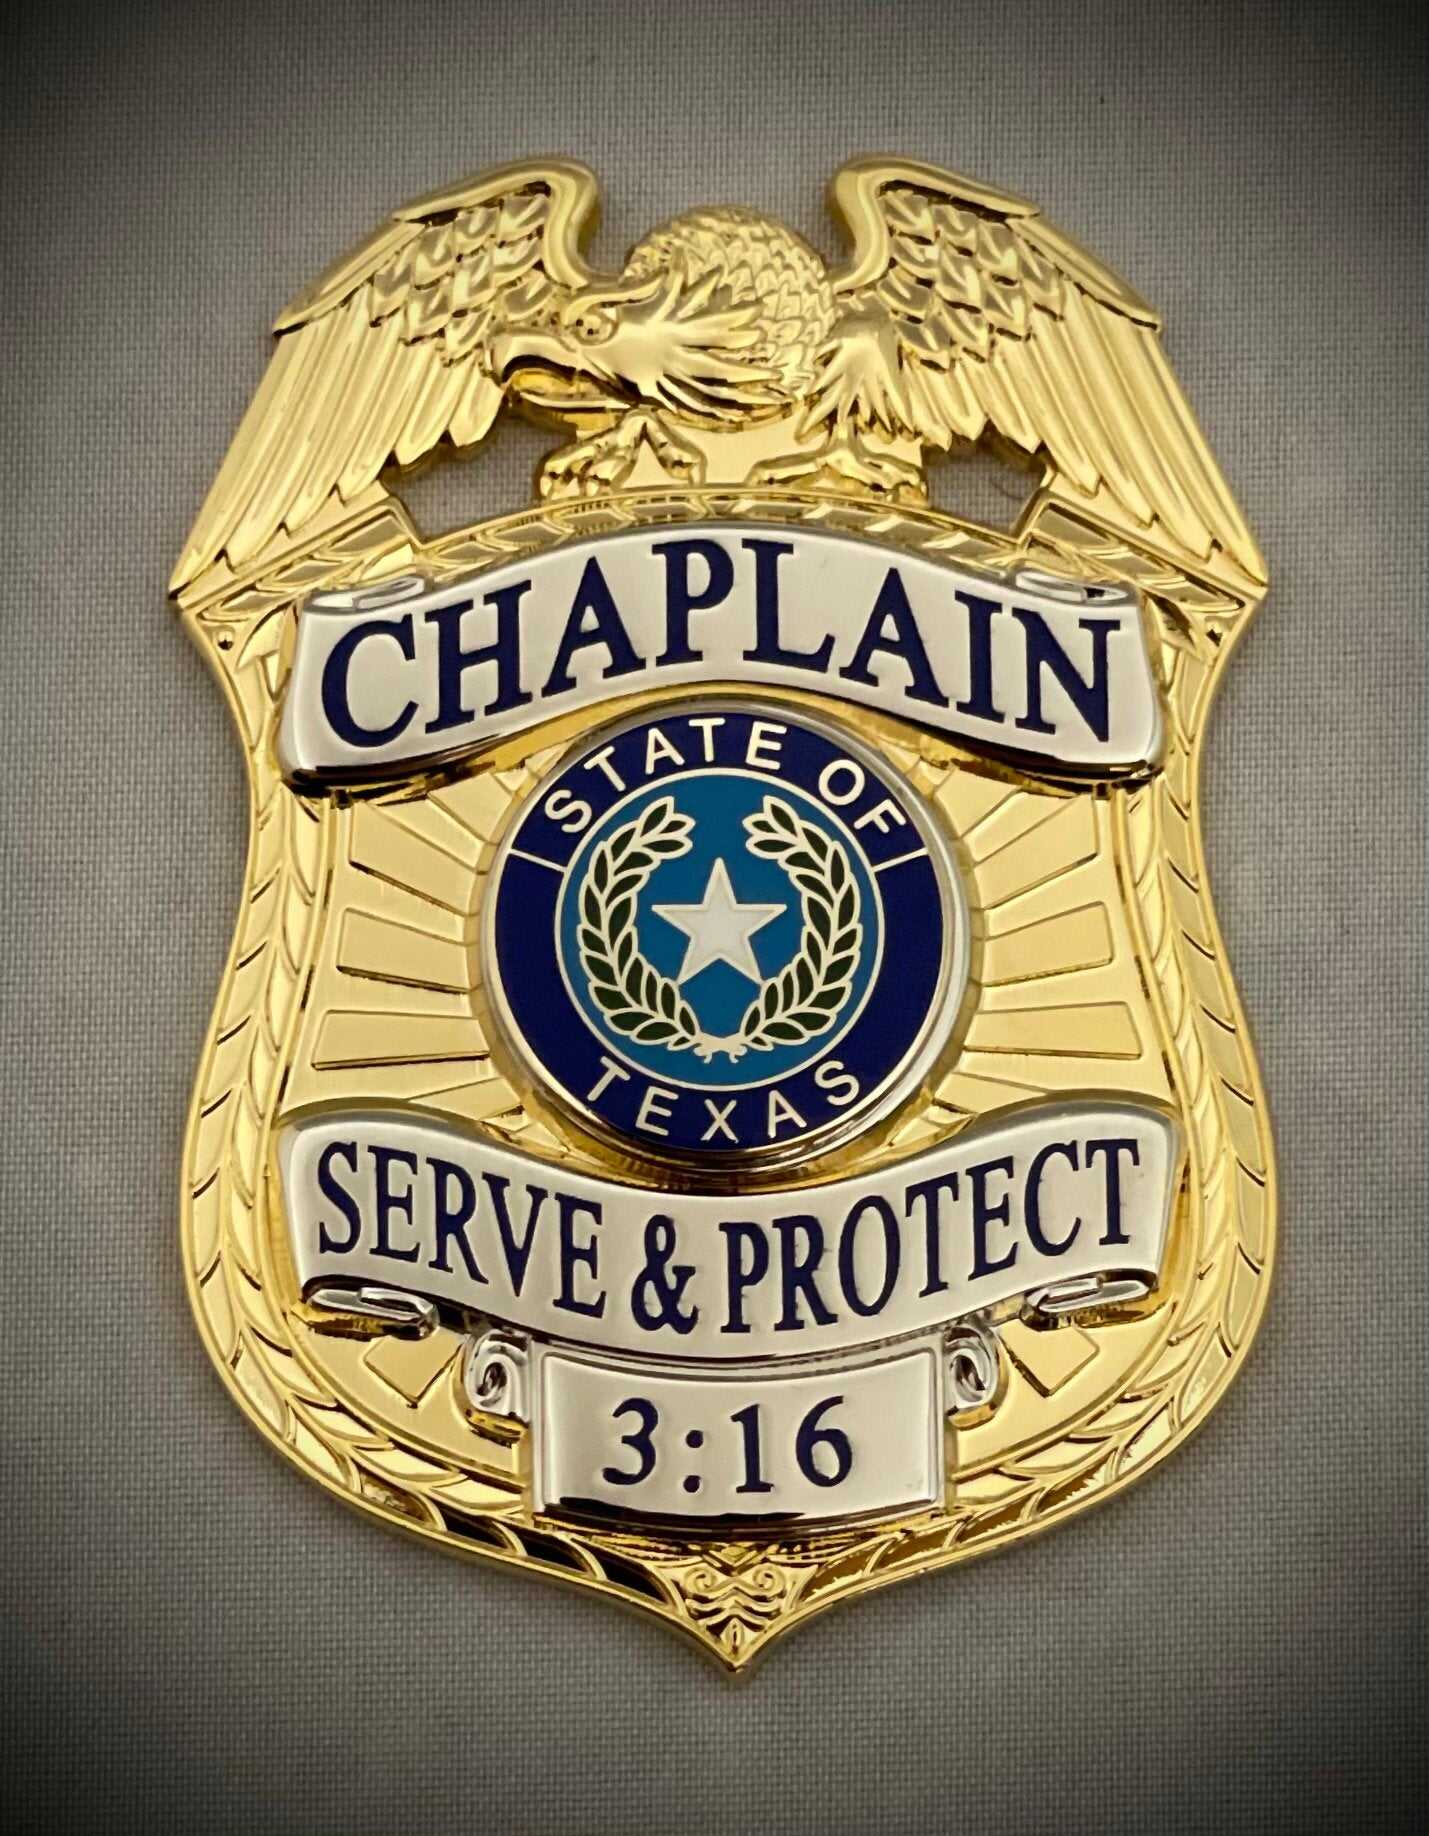 Chaplain Serve and Protect Gold Two-Tone Badge and 2 Nameplates leather ID holder